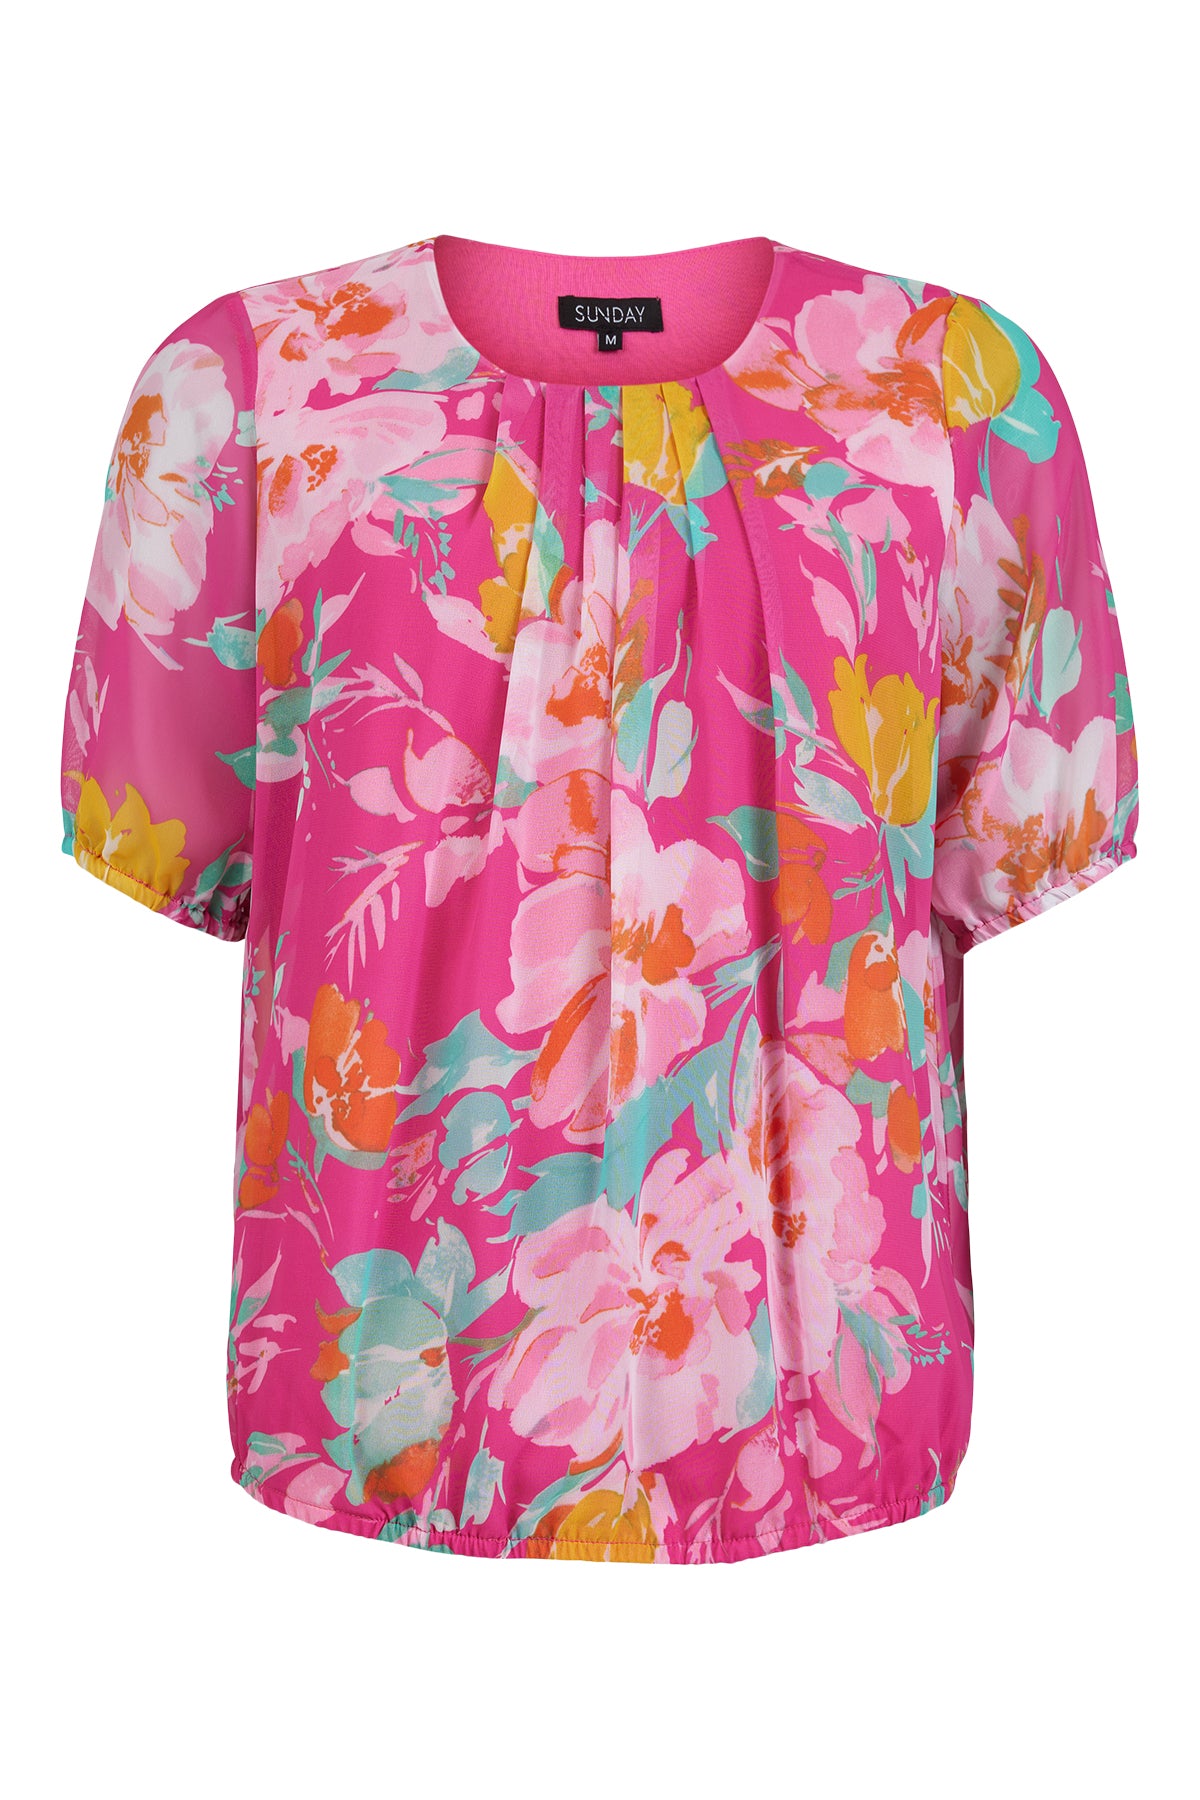 Pink Top Multi-Coloured Flower Print With Elasticated Sleeves & Waist Detailing